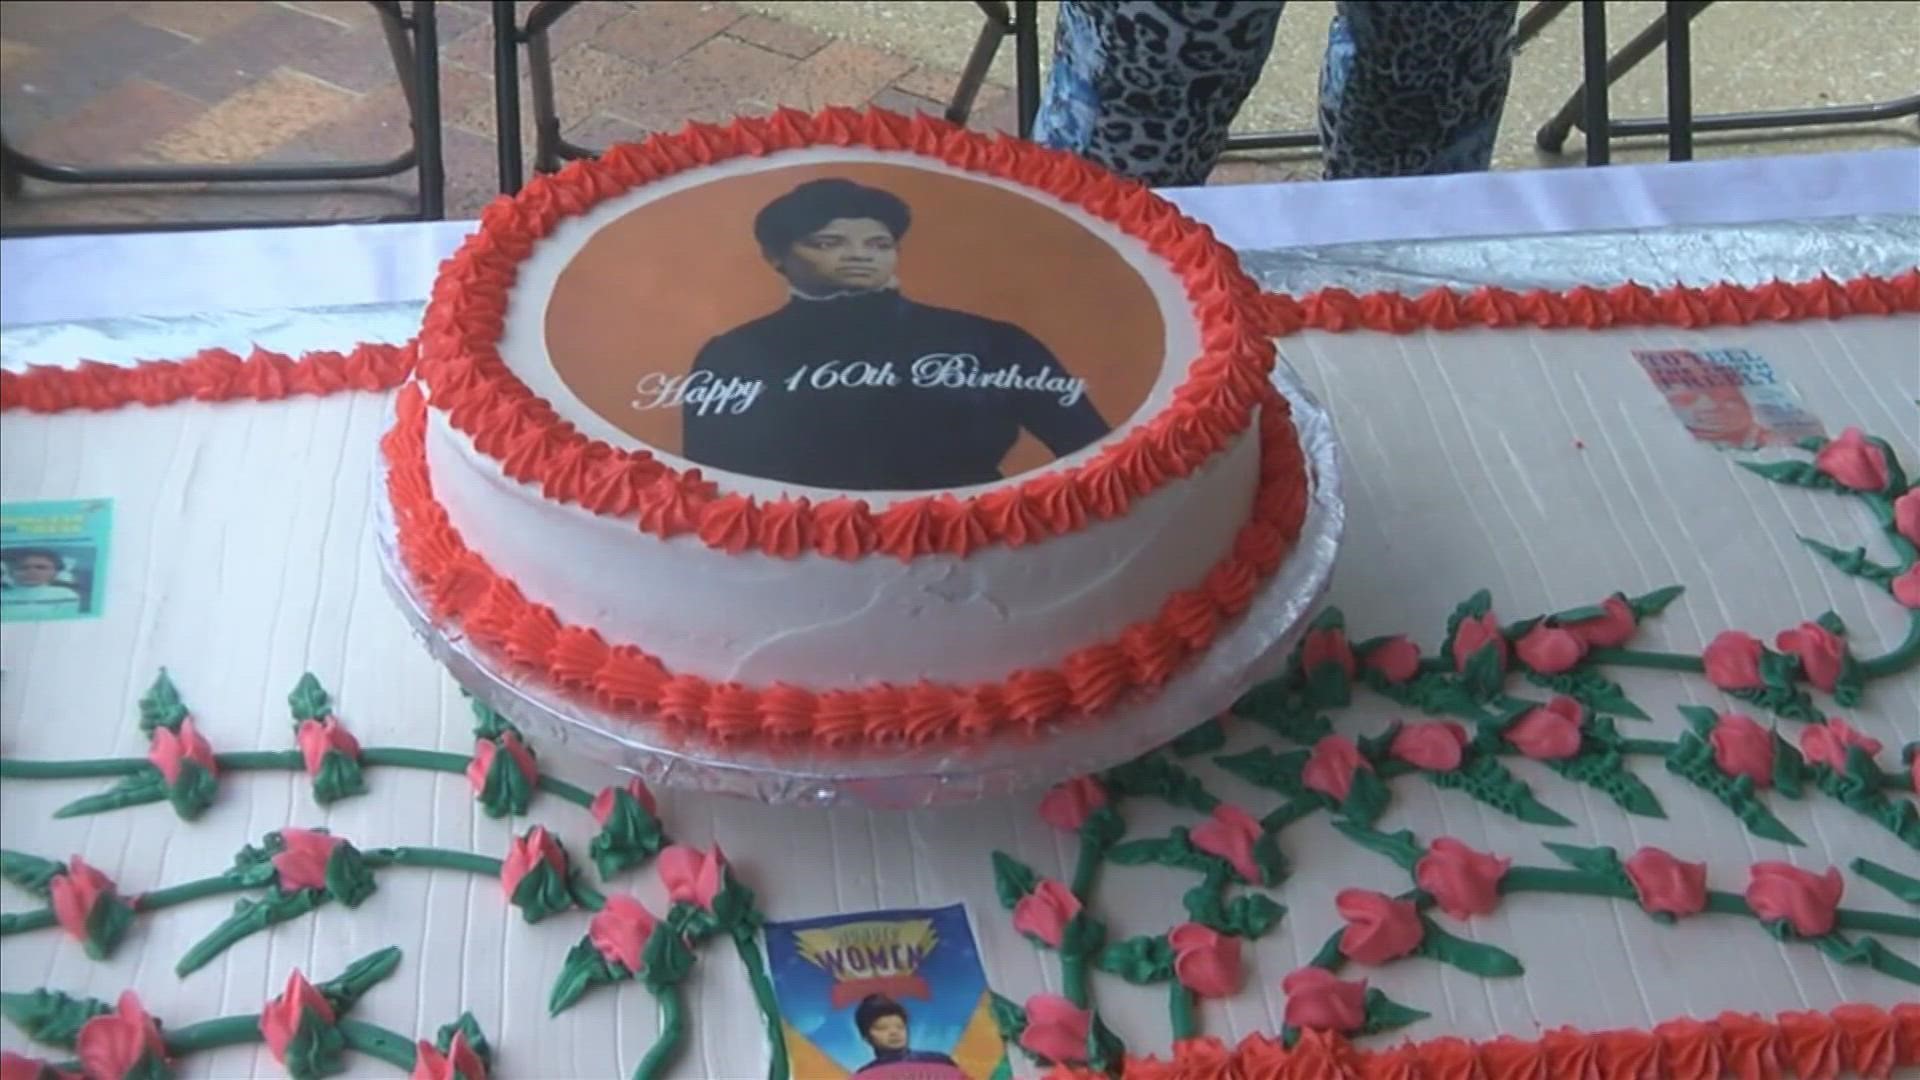 Memphis journalist and activist Ida B. Wells was honored on Saturday with a groundbreaking for a plaza in her namesake. A second phase of the dedication is also set